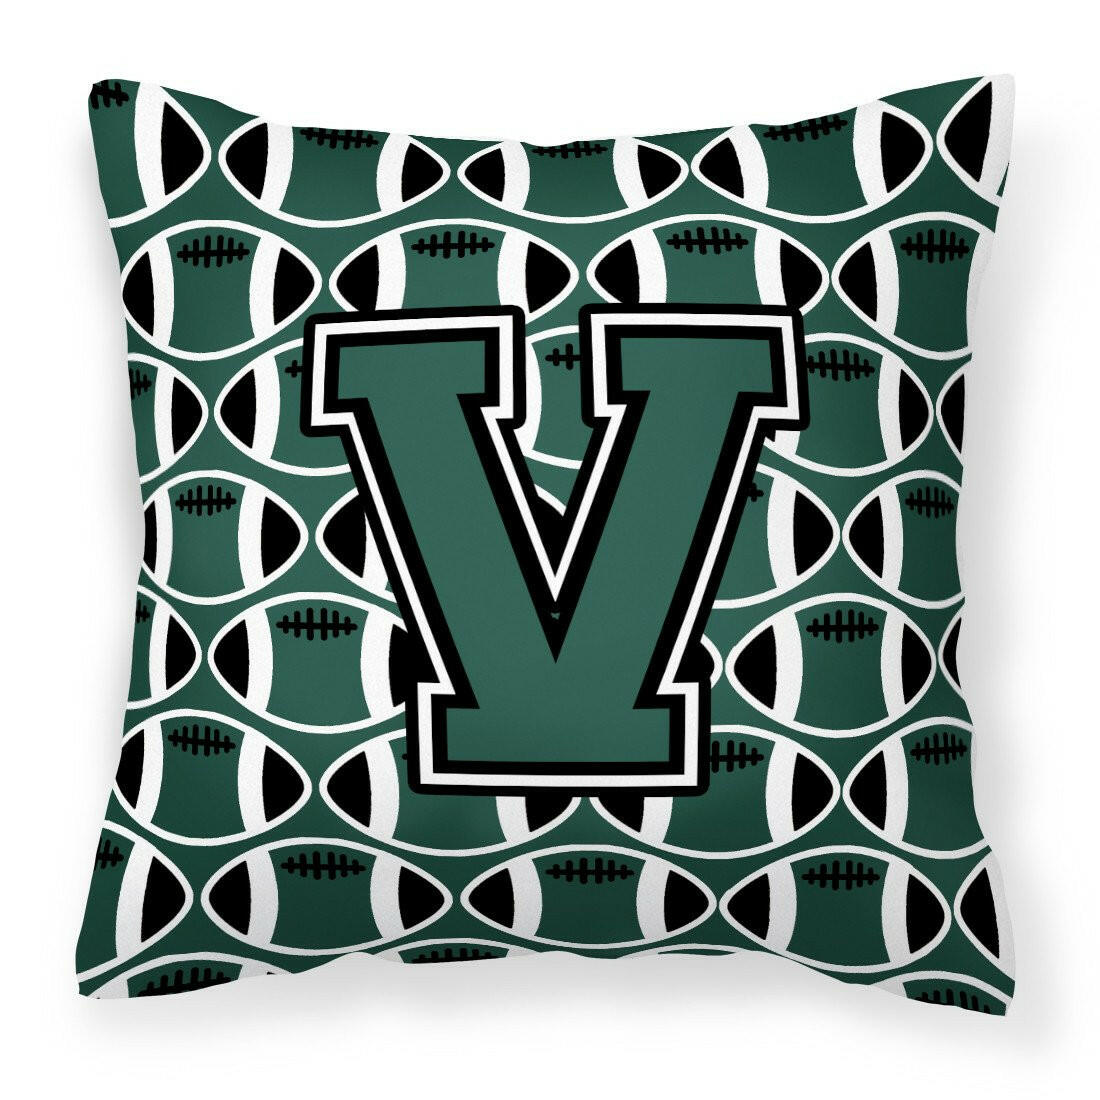 Letter V Football Green and White Fabric Decorative Pillow CJ1071-VPW1414 by Caroline's Treasures